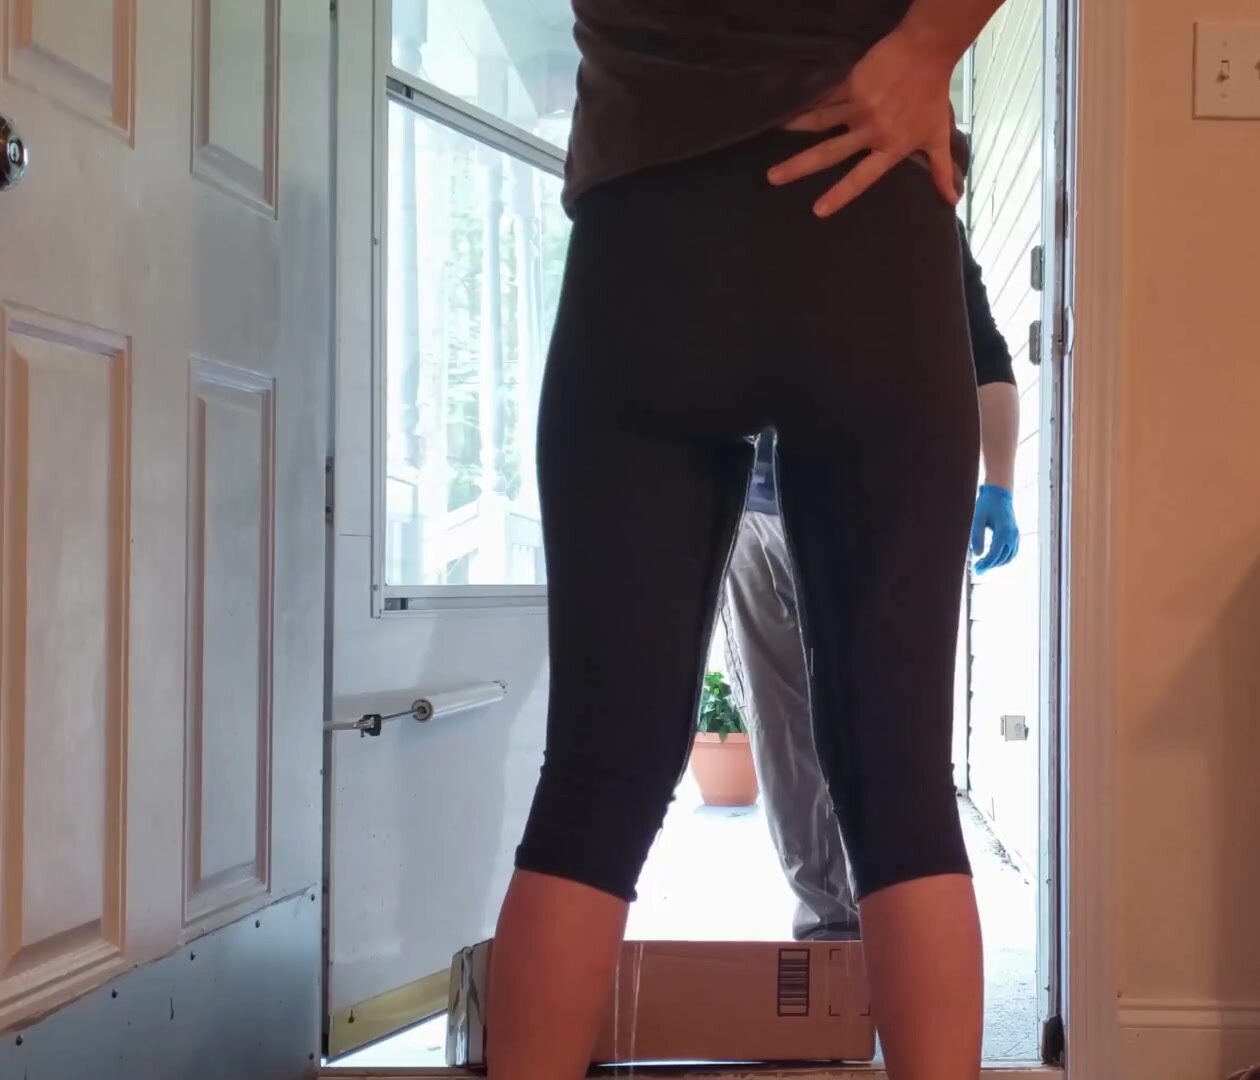 My Wife Wet her Leggings in Front of the Delivery Guy